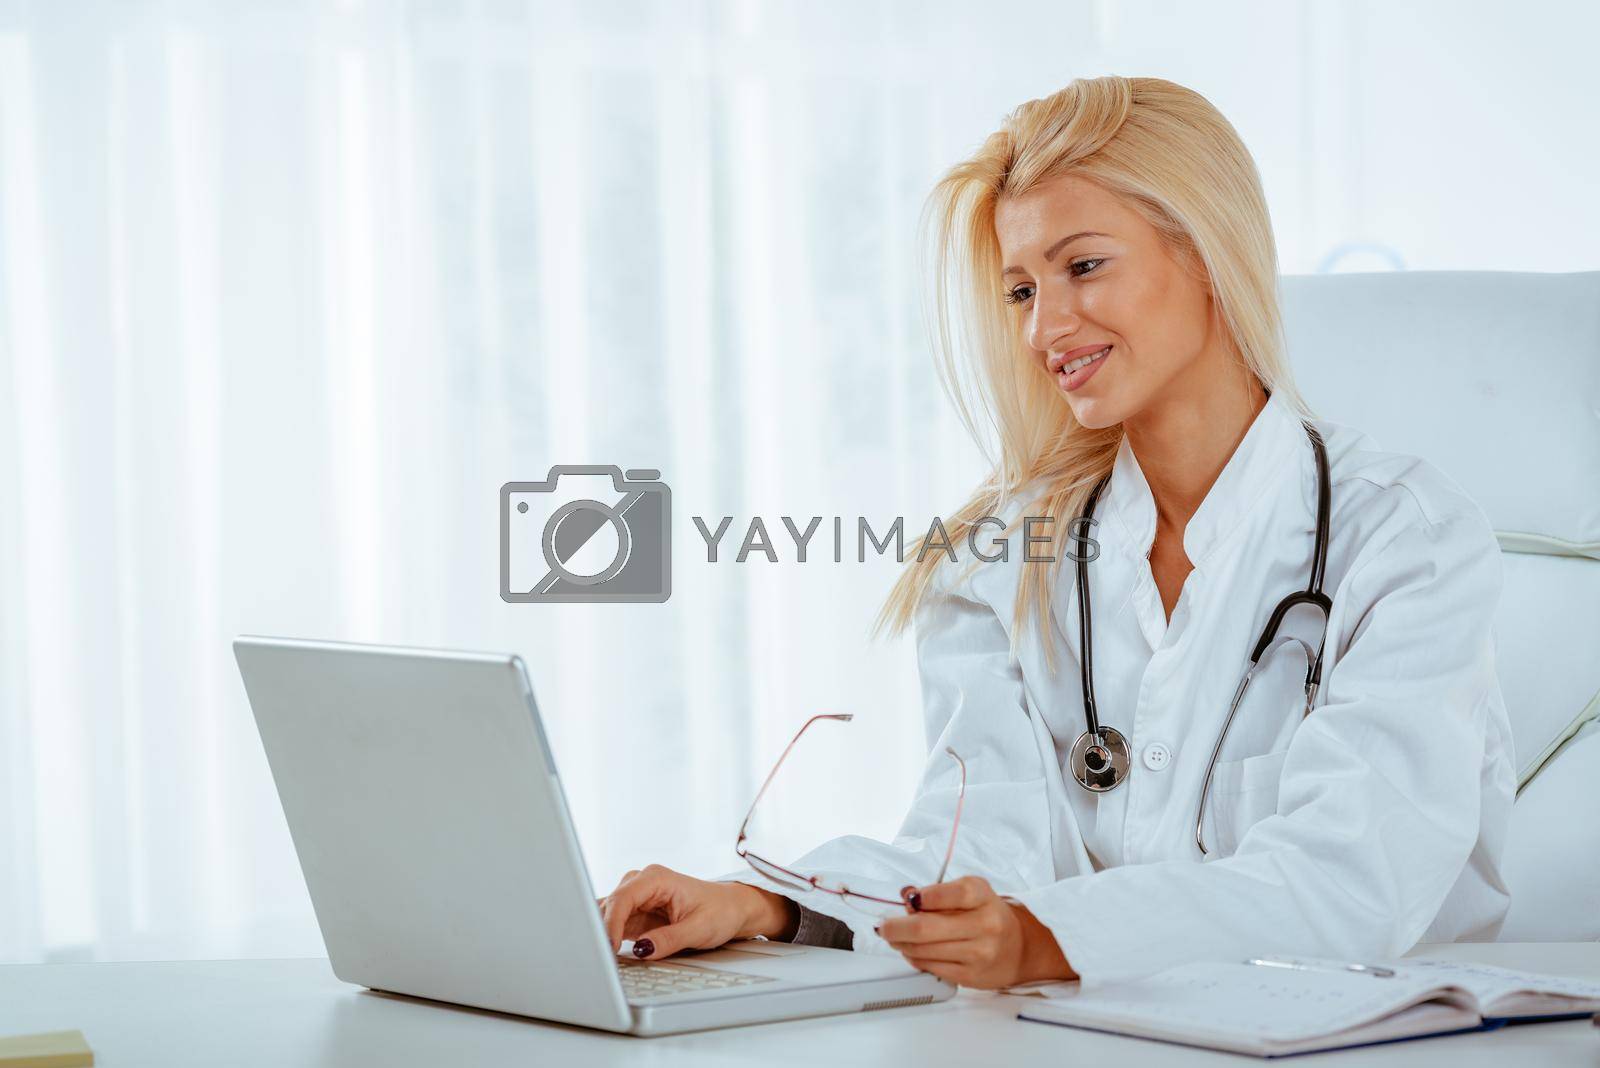 Royalty free image of Healthcare Professional by MilanMarkovic78